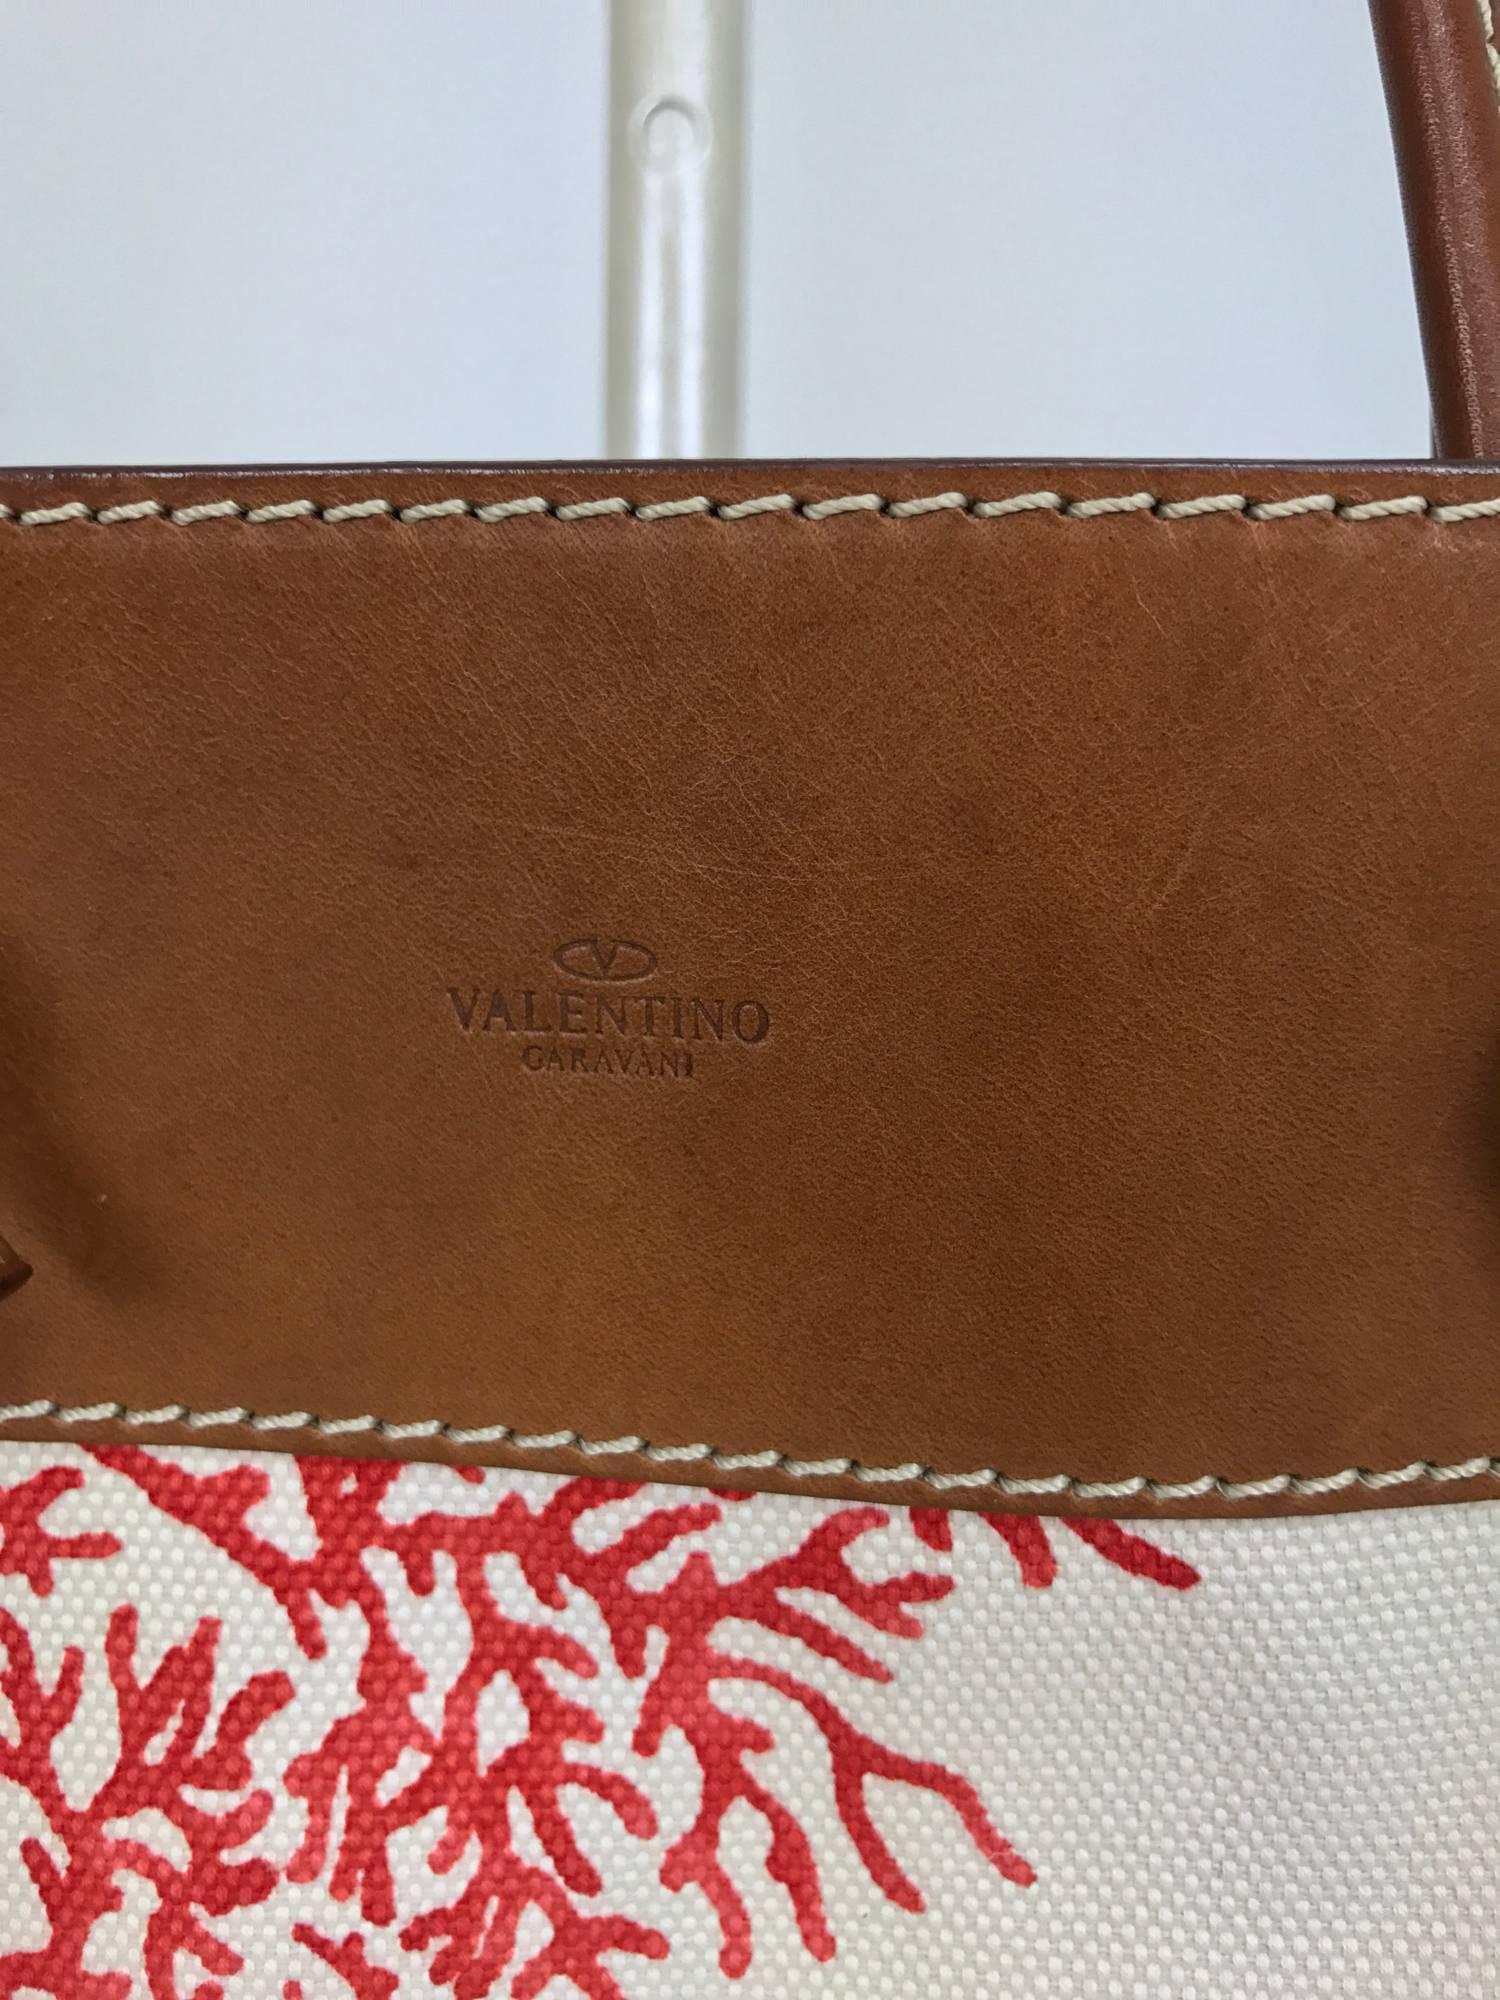 Valentino leather trimmed painted coral canvas tote bag...Beautiful bag with wide cognac saddle leather band and handles at the bag top and sides with cream top stitching...Painted branch coral on off white canvas...The bag is lined in pale coral